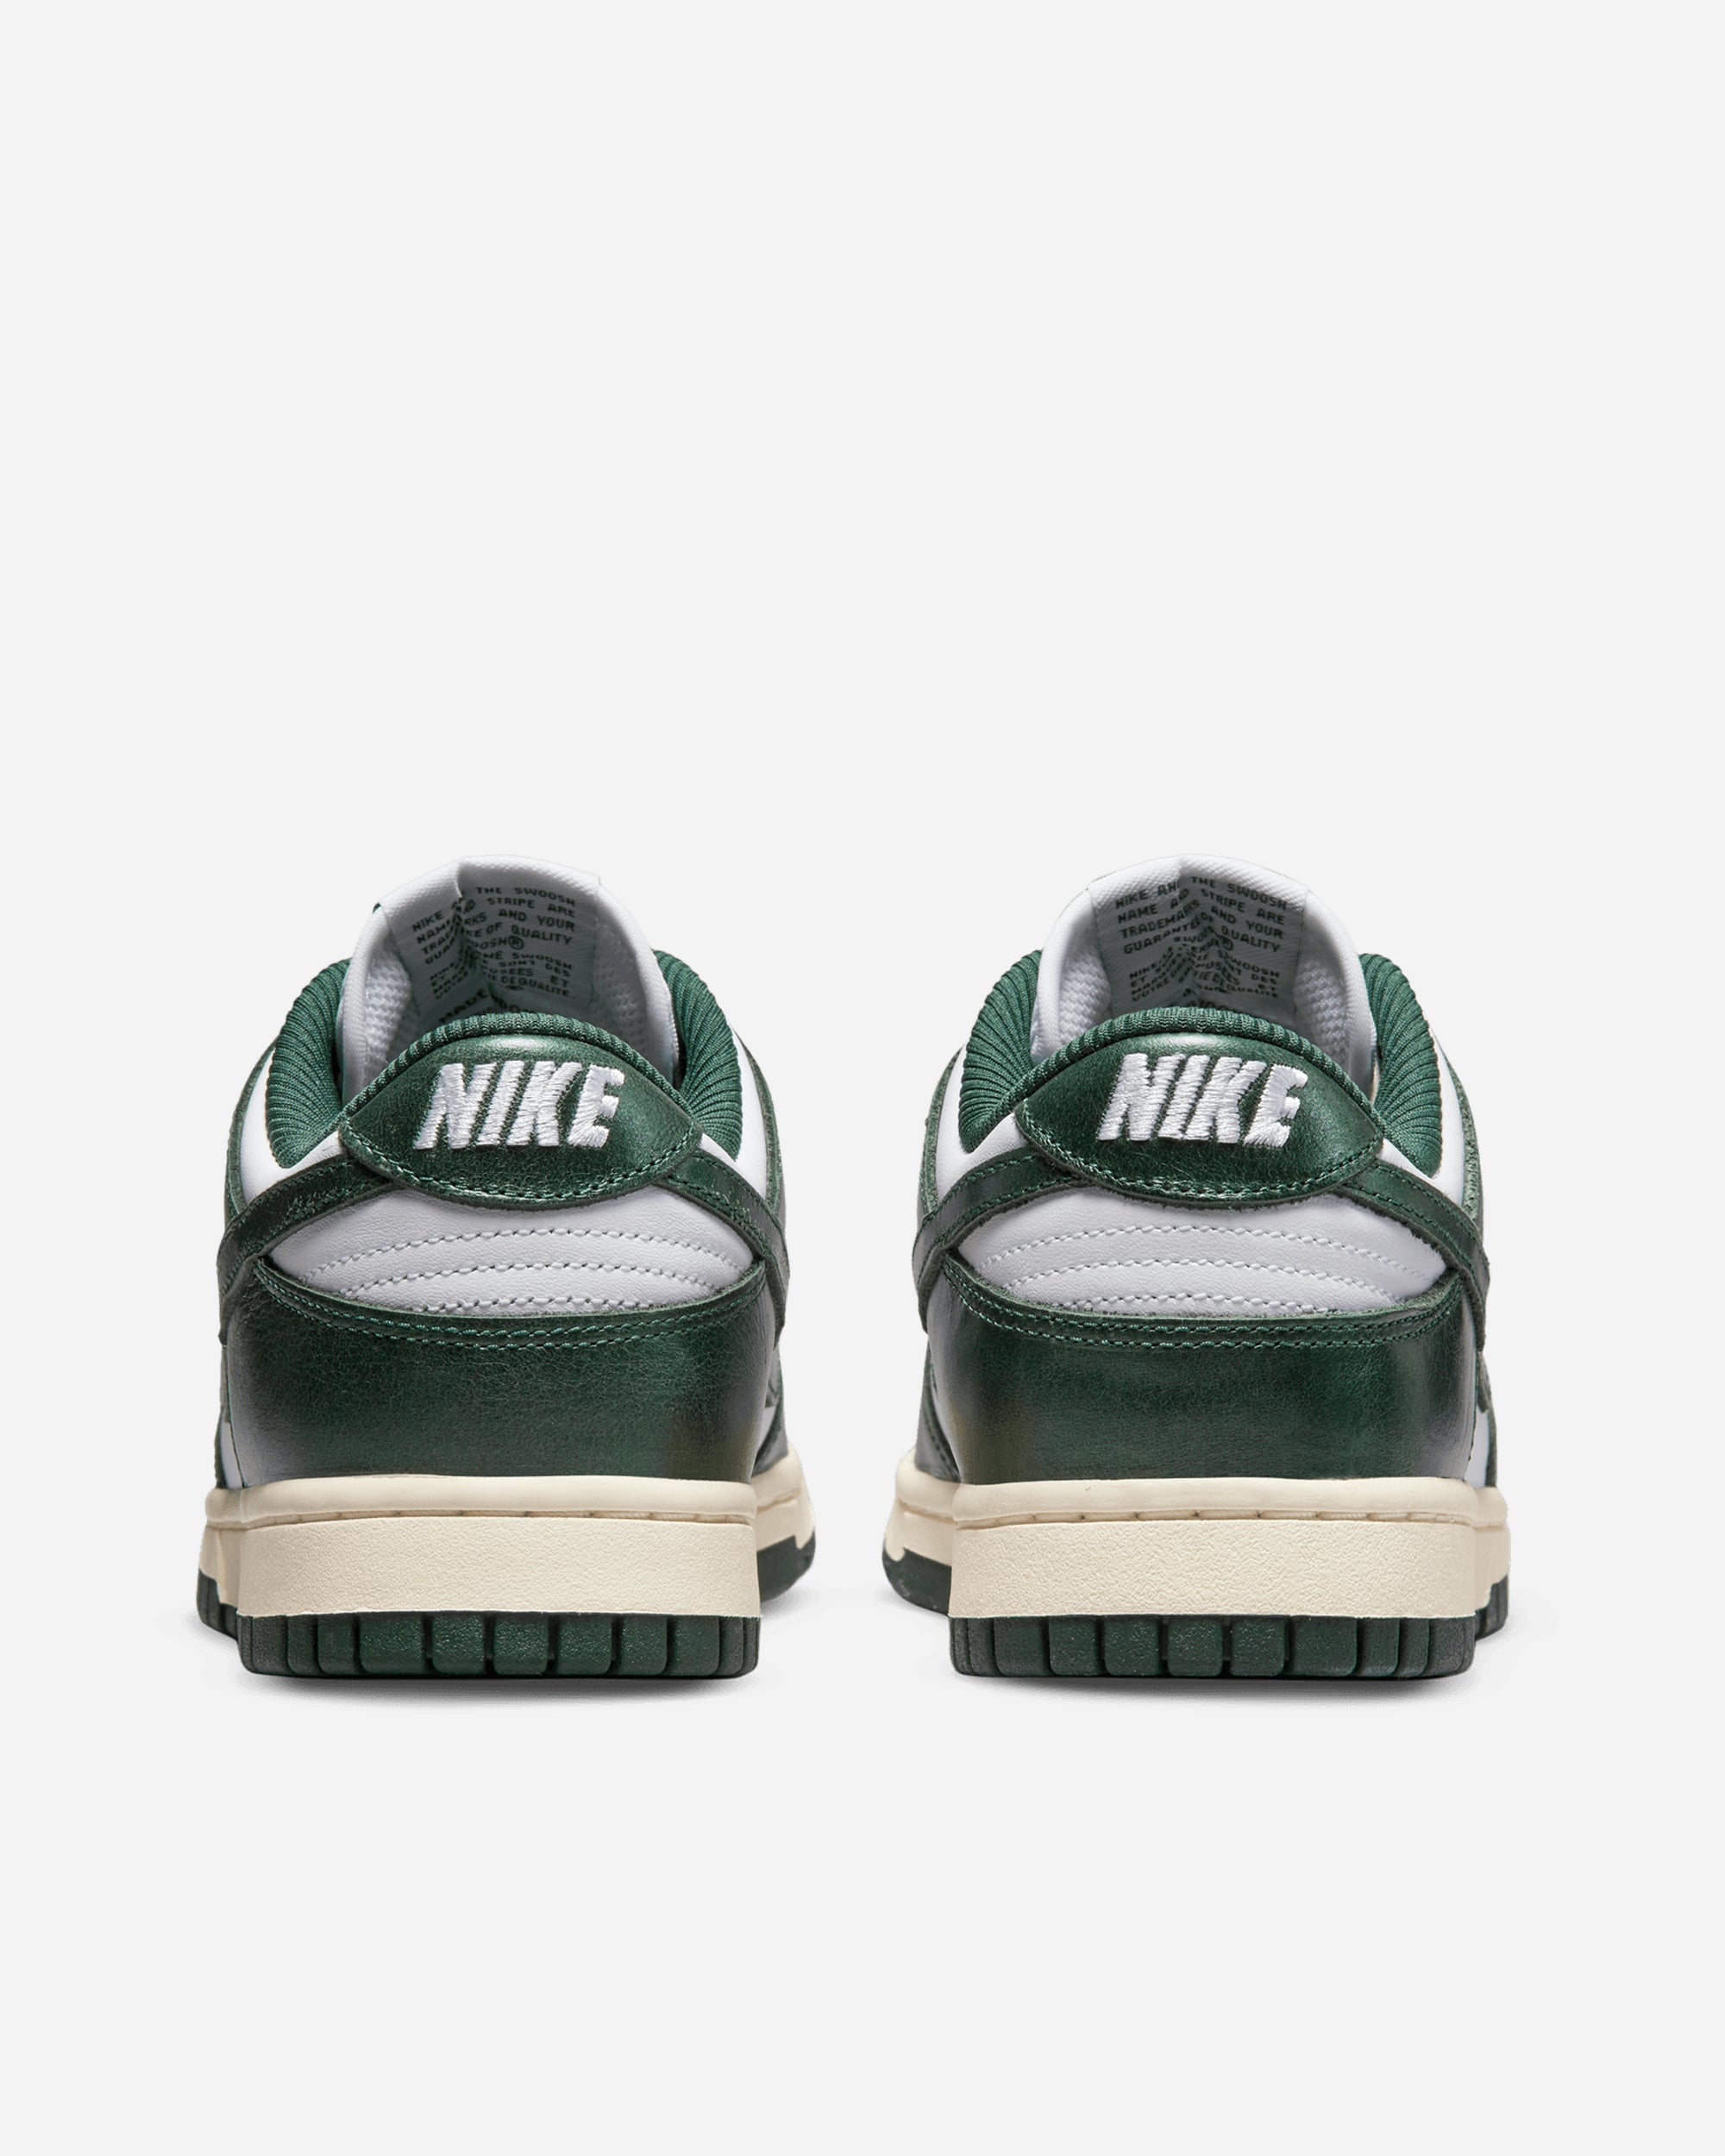 Nike Dunk Low 'Vintage Green' WHITE/PRO GREEN-COCONUT MILK DQ8580-100